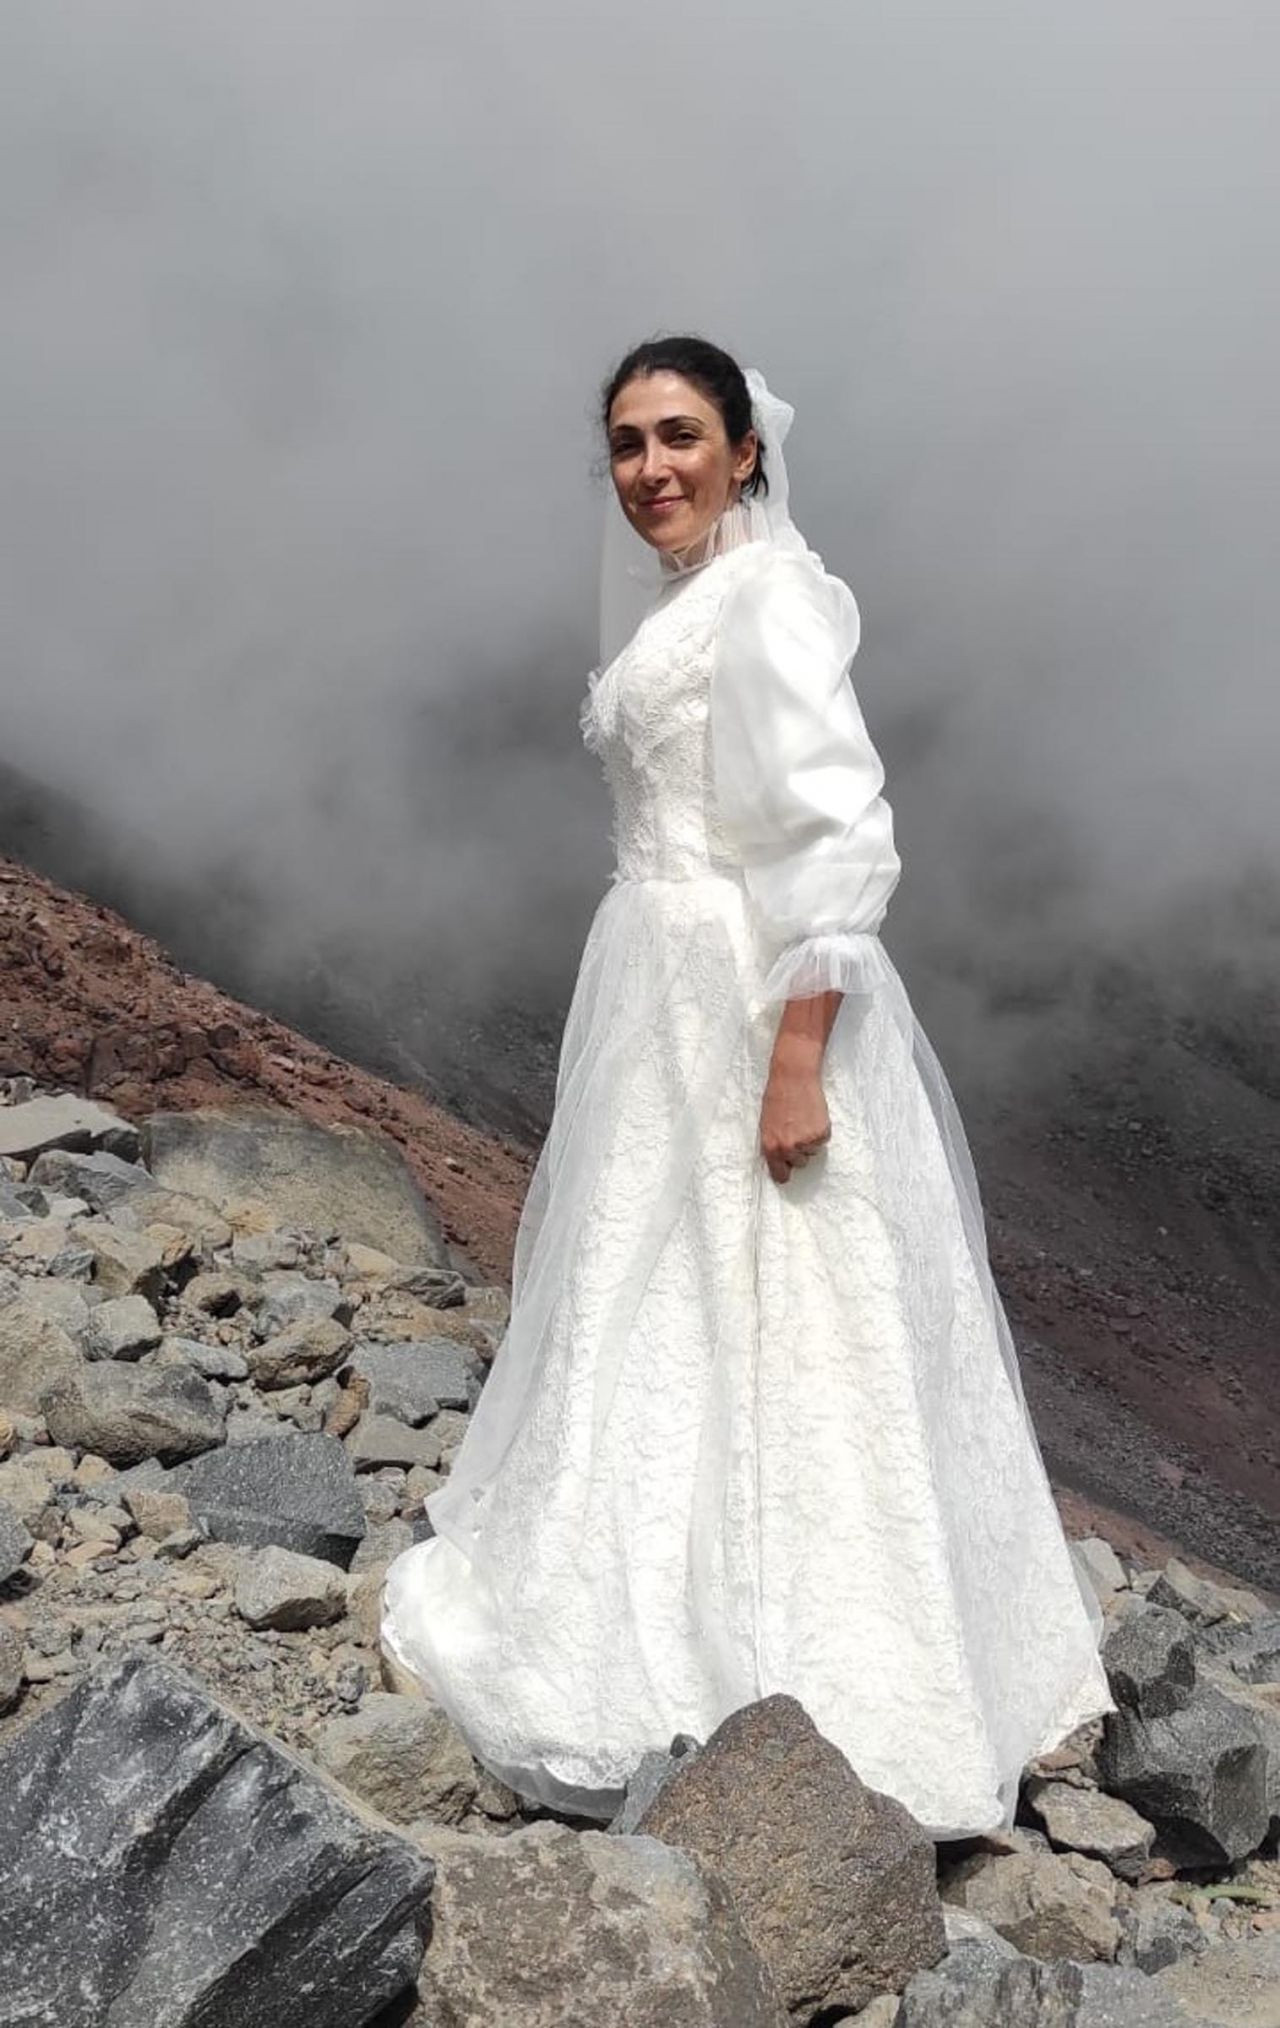 Turkish climber 'marries' Mount Ararat to protest violence against women - Page 5